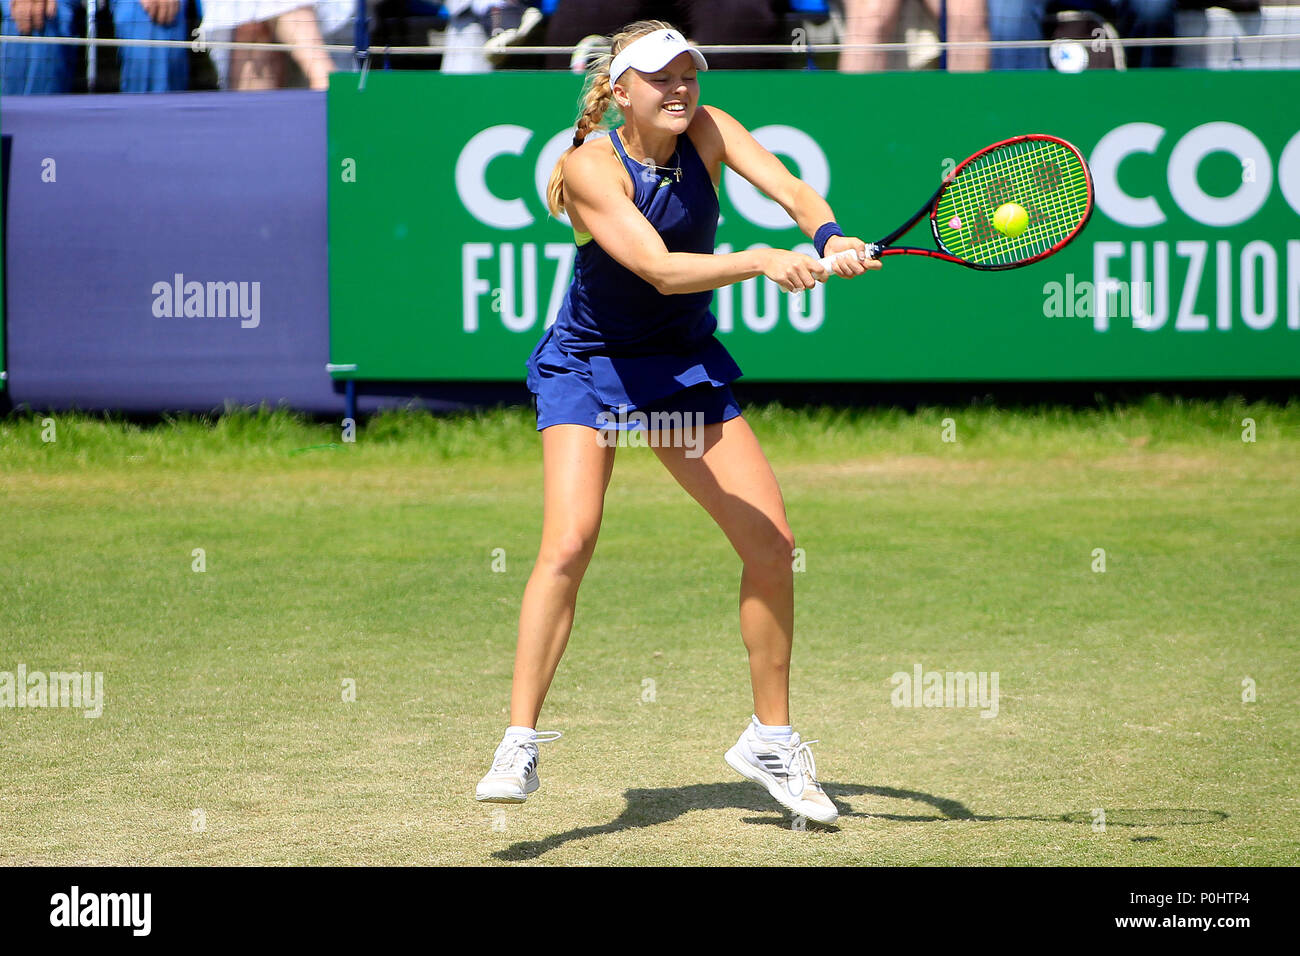 London, UK, Harriet Dart of Great Britain in action in her semi final  against Conny Perrin of Switzerland. Fuzion 100 Surbiton trophy 2018 tennis  event , day 6 at the Surbiton Racket